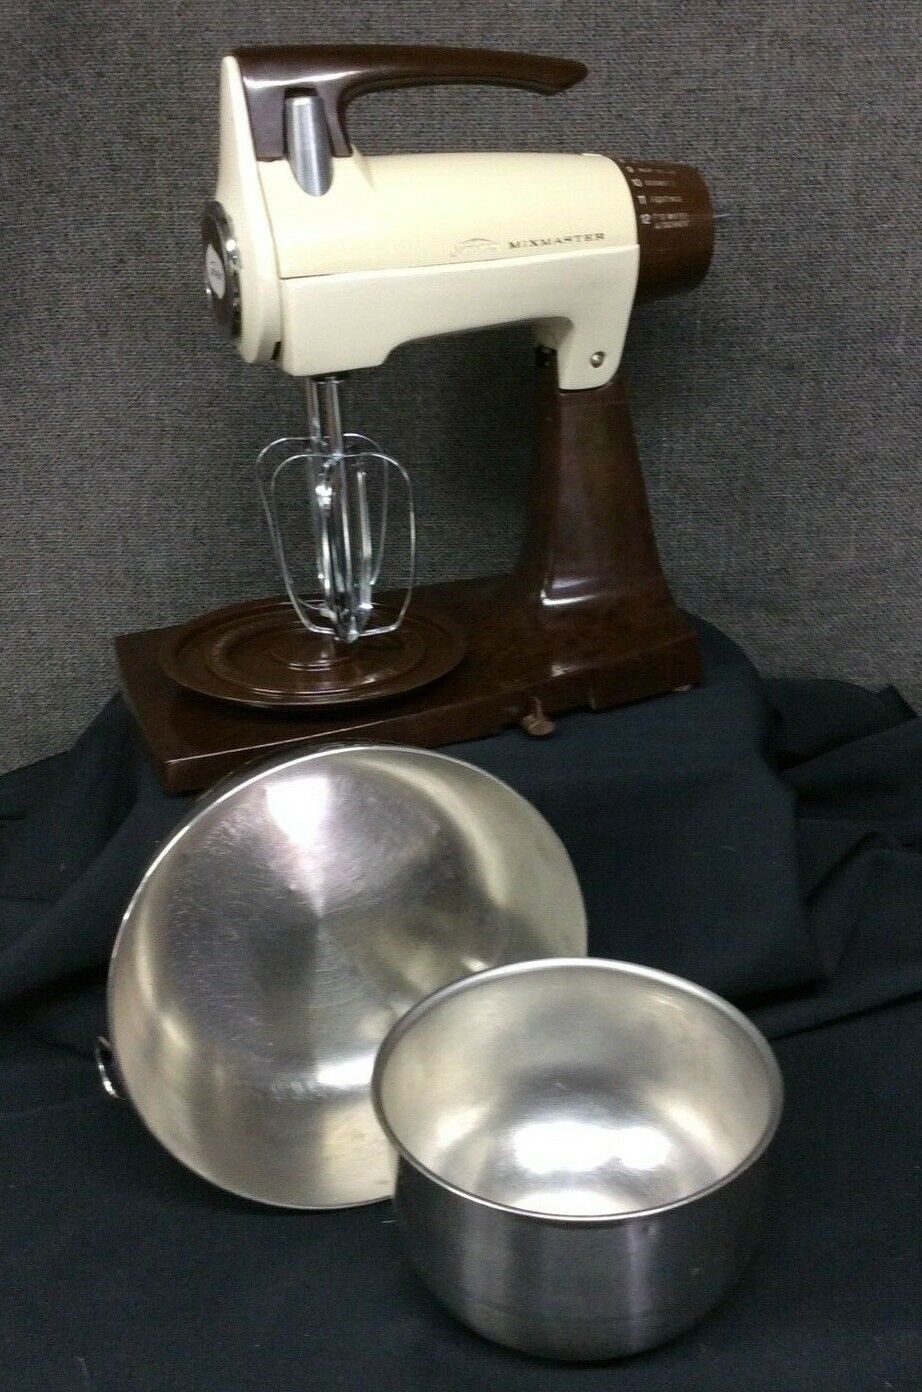 Vintage Sunbeam Mixmaster 12 Speed Stand Mixer w/Bowl Beaters Cord  Tan/Brown - Mixers & Blenders, Facebook Marketplace